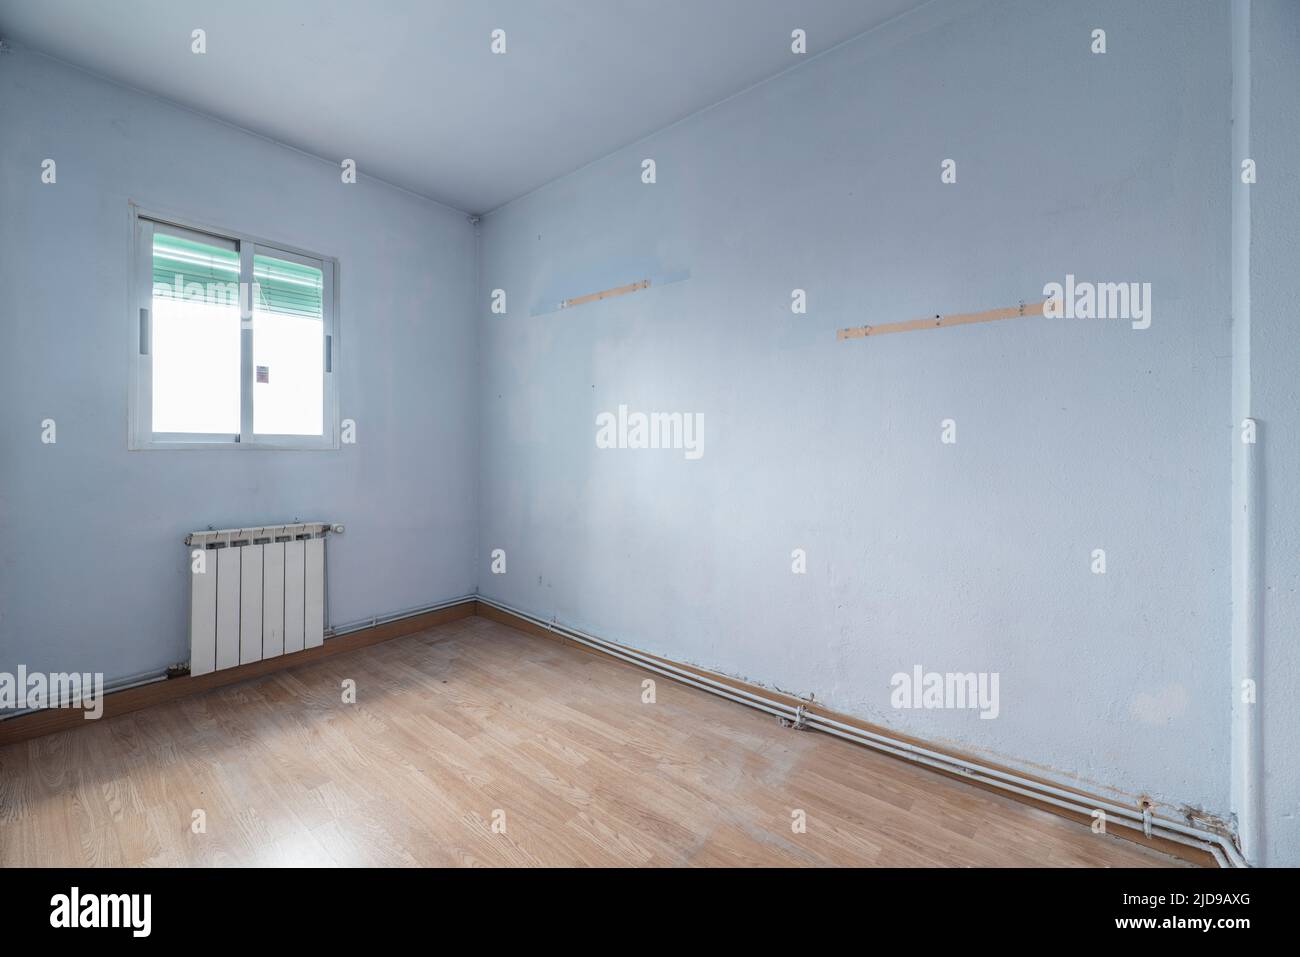 Empty room with oak flooring and blue painted walls Stock Photo